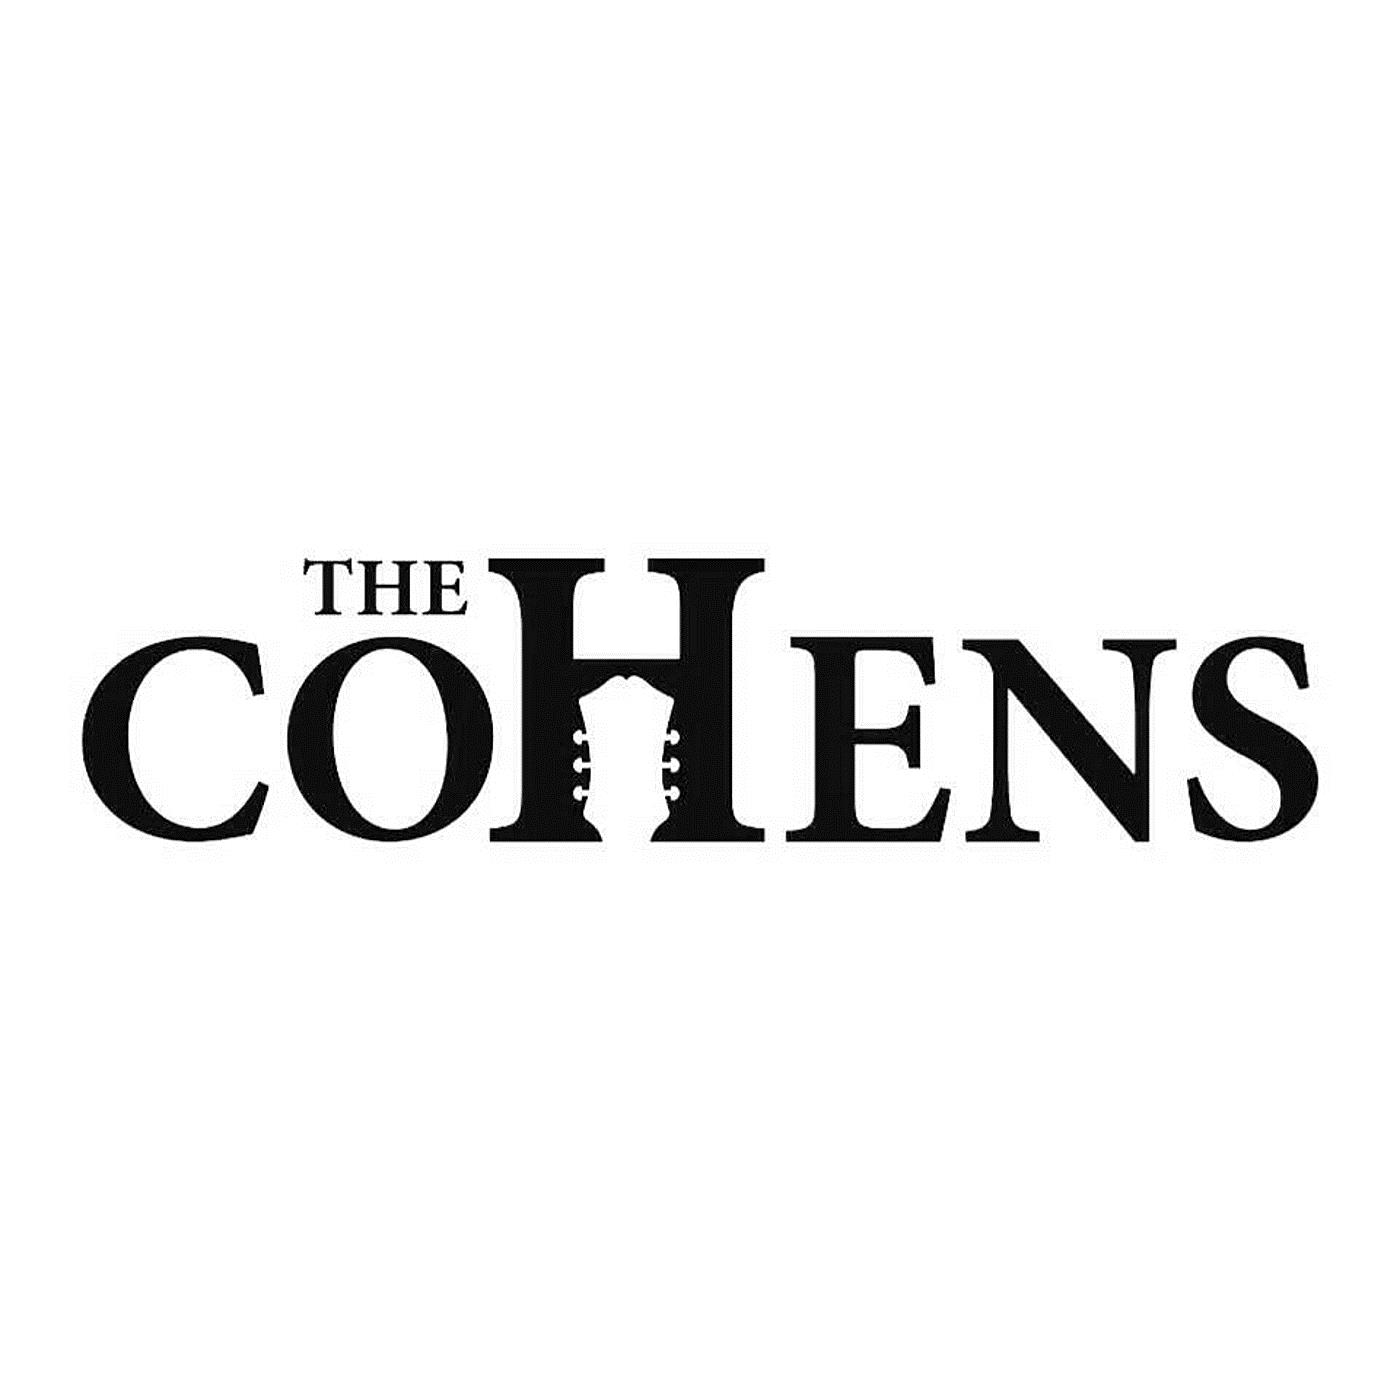 The Cohens